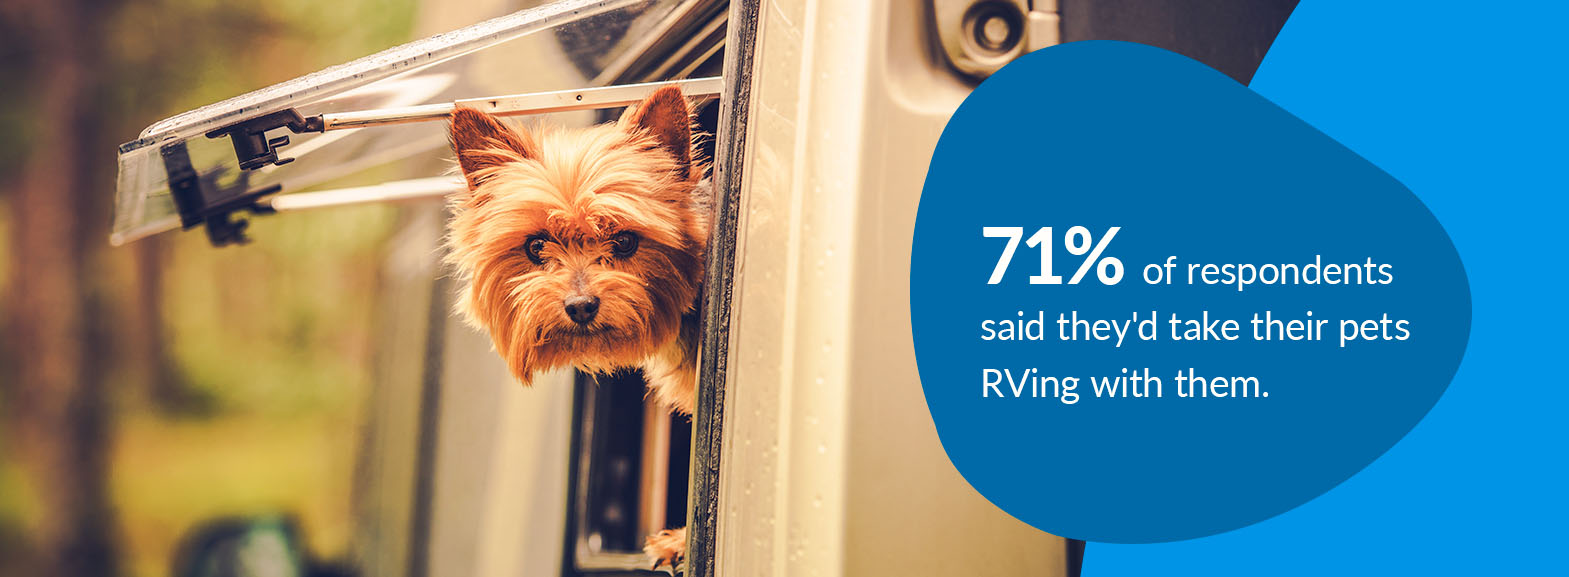 71% of respondents said they'd take their pets RVing with them